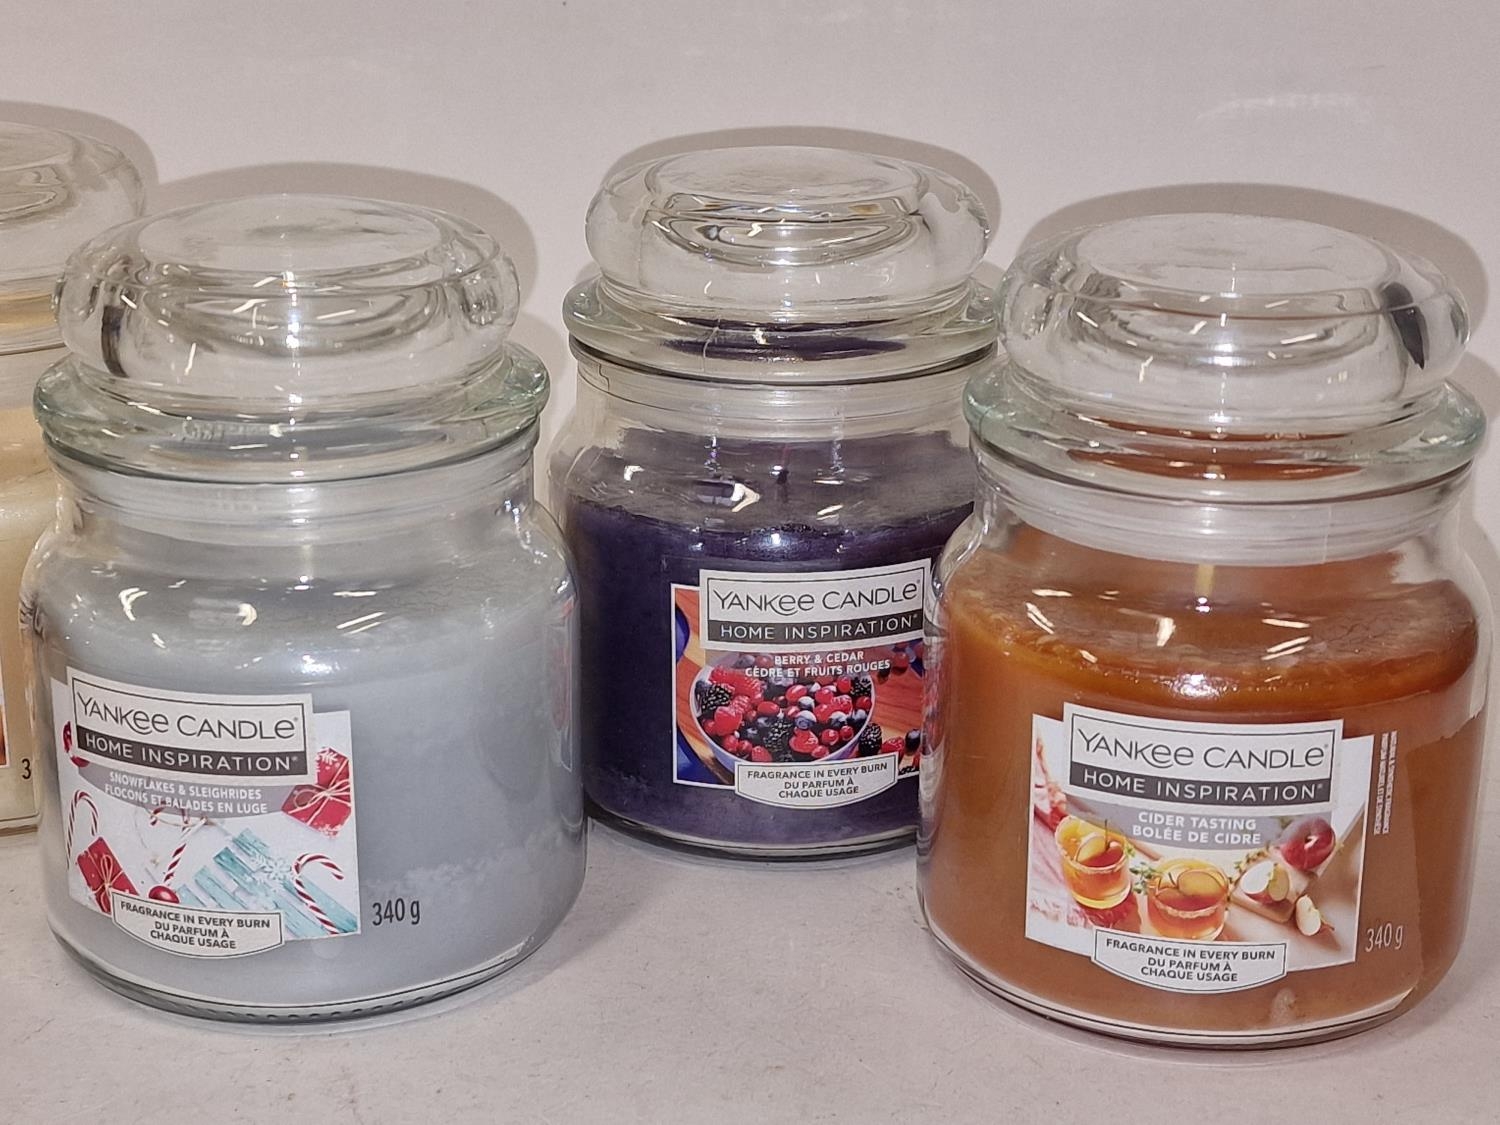 Sx 340g Yankee candles. (220) - Image 2 of 3